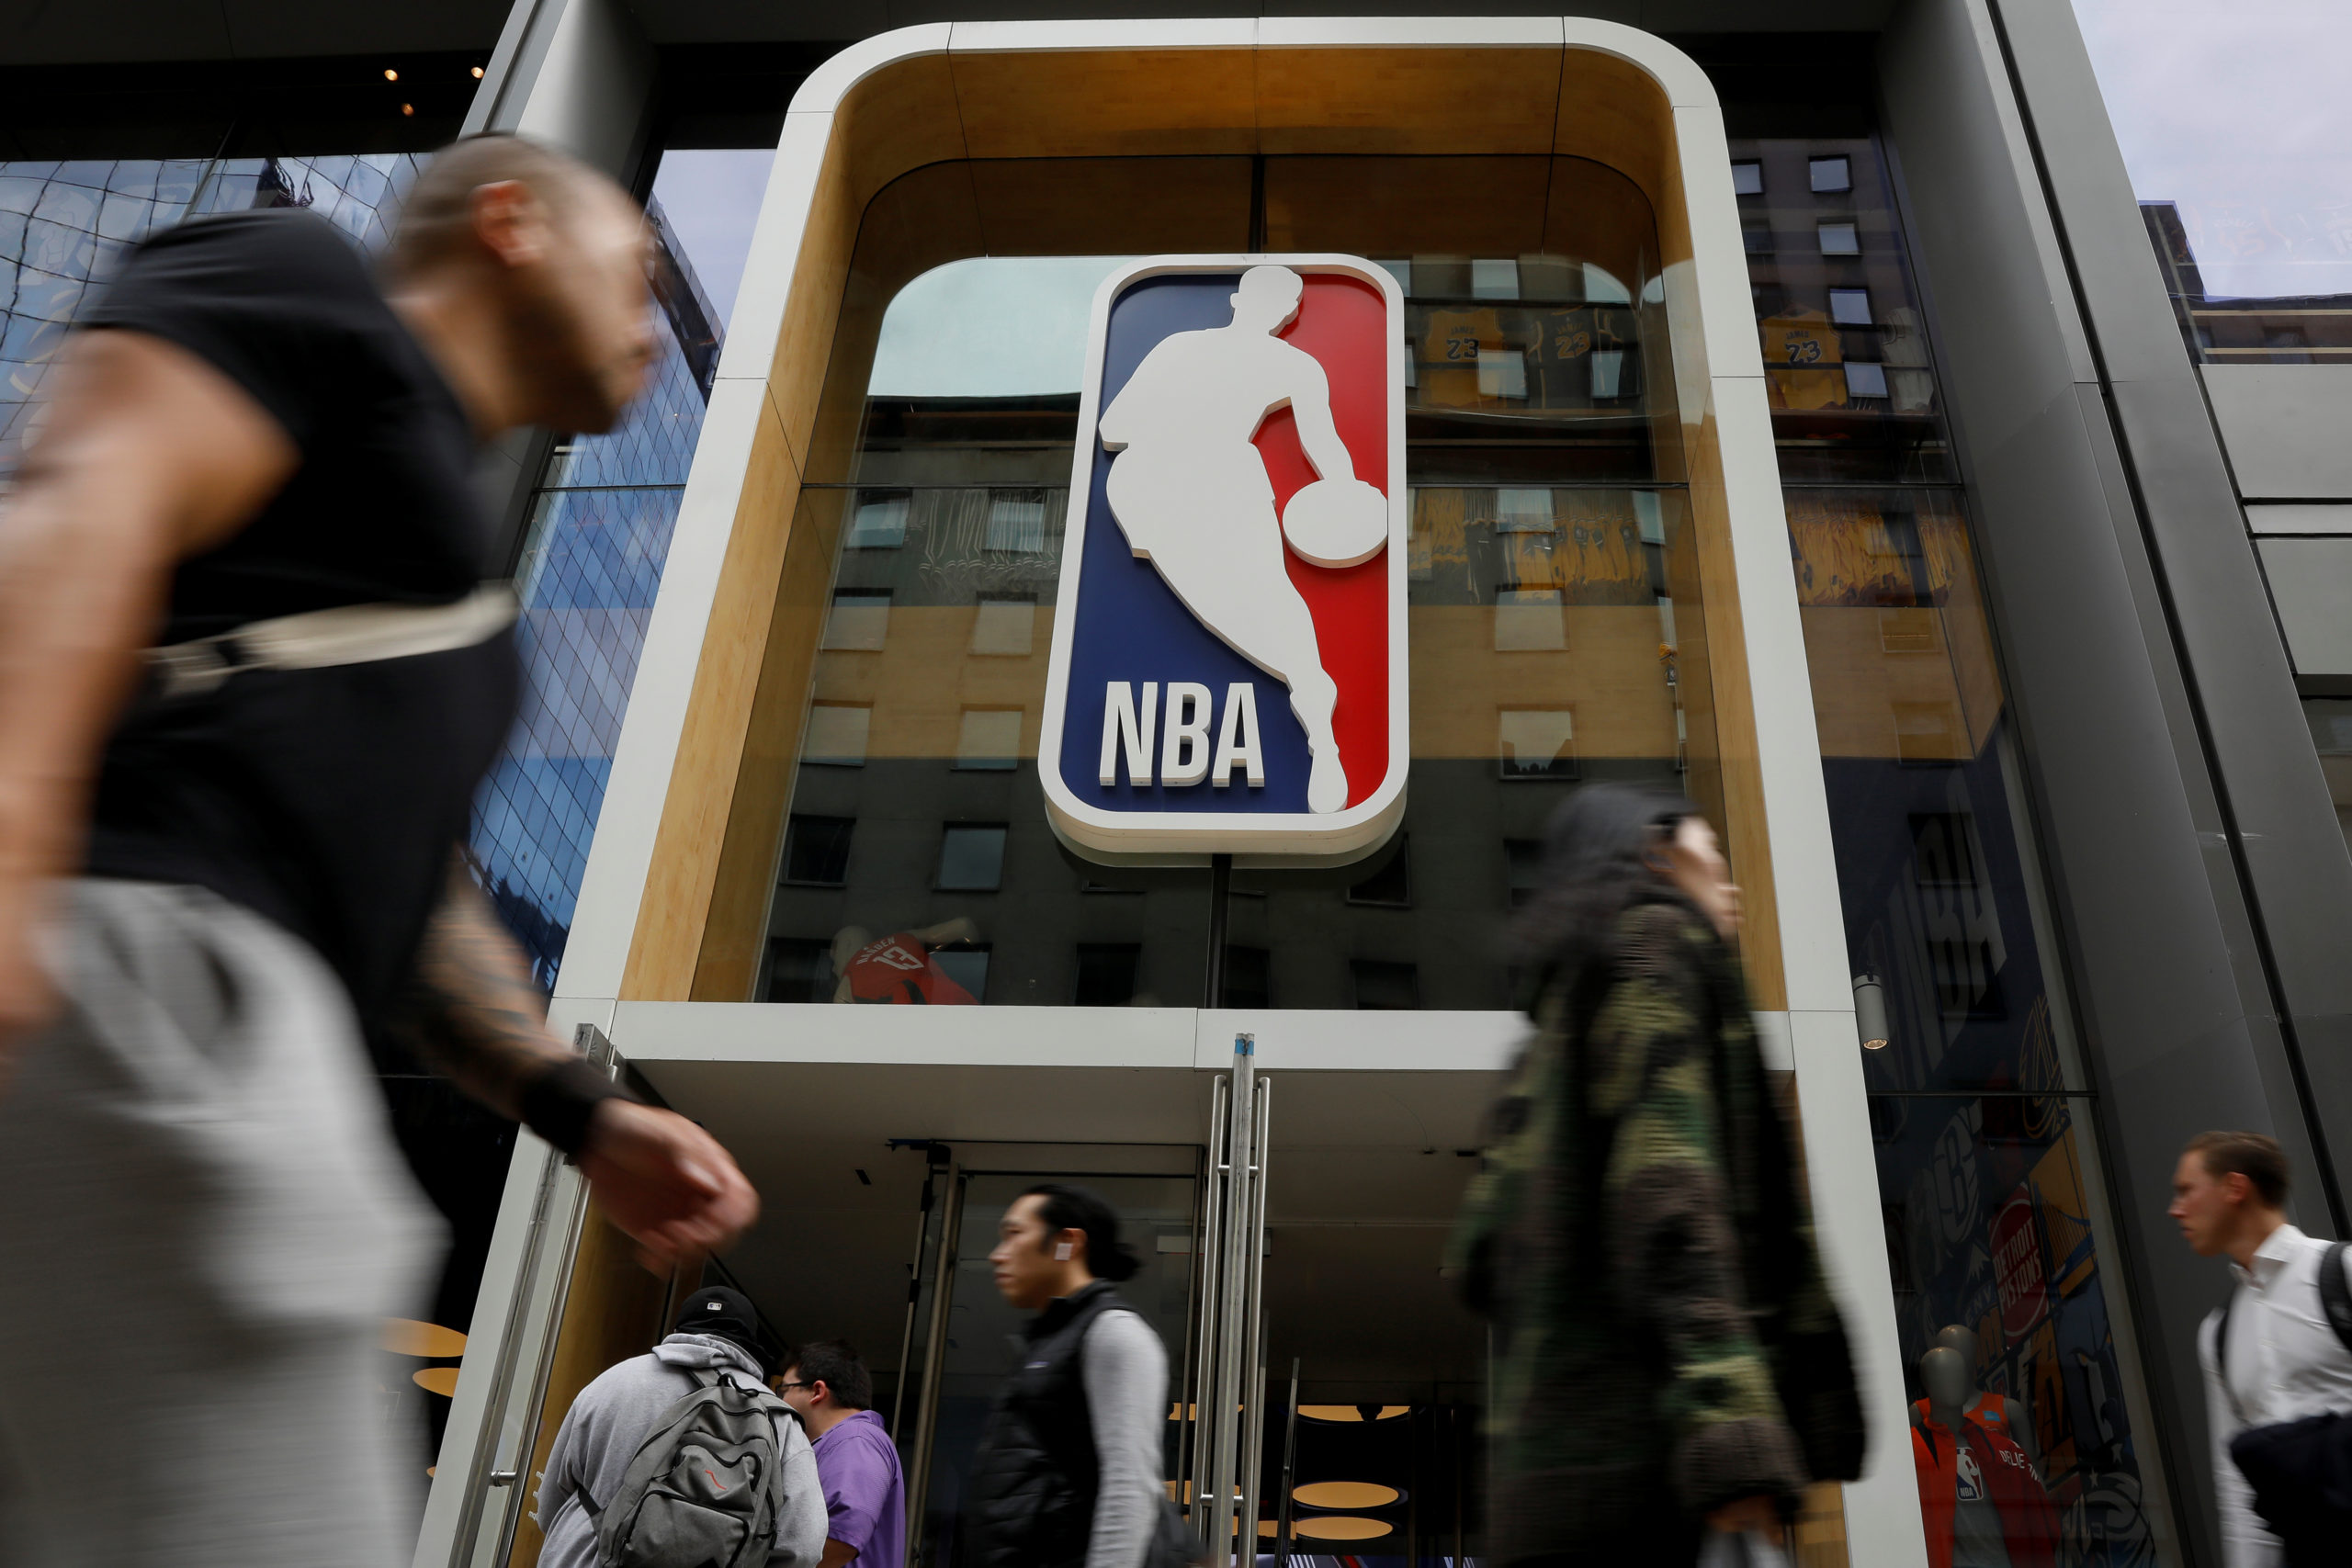 The NBA logo is displayed as people pass by the NBA Store in New York